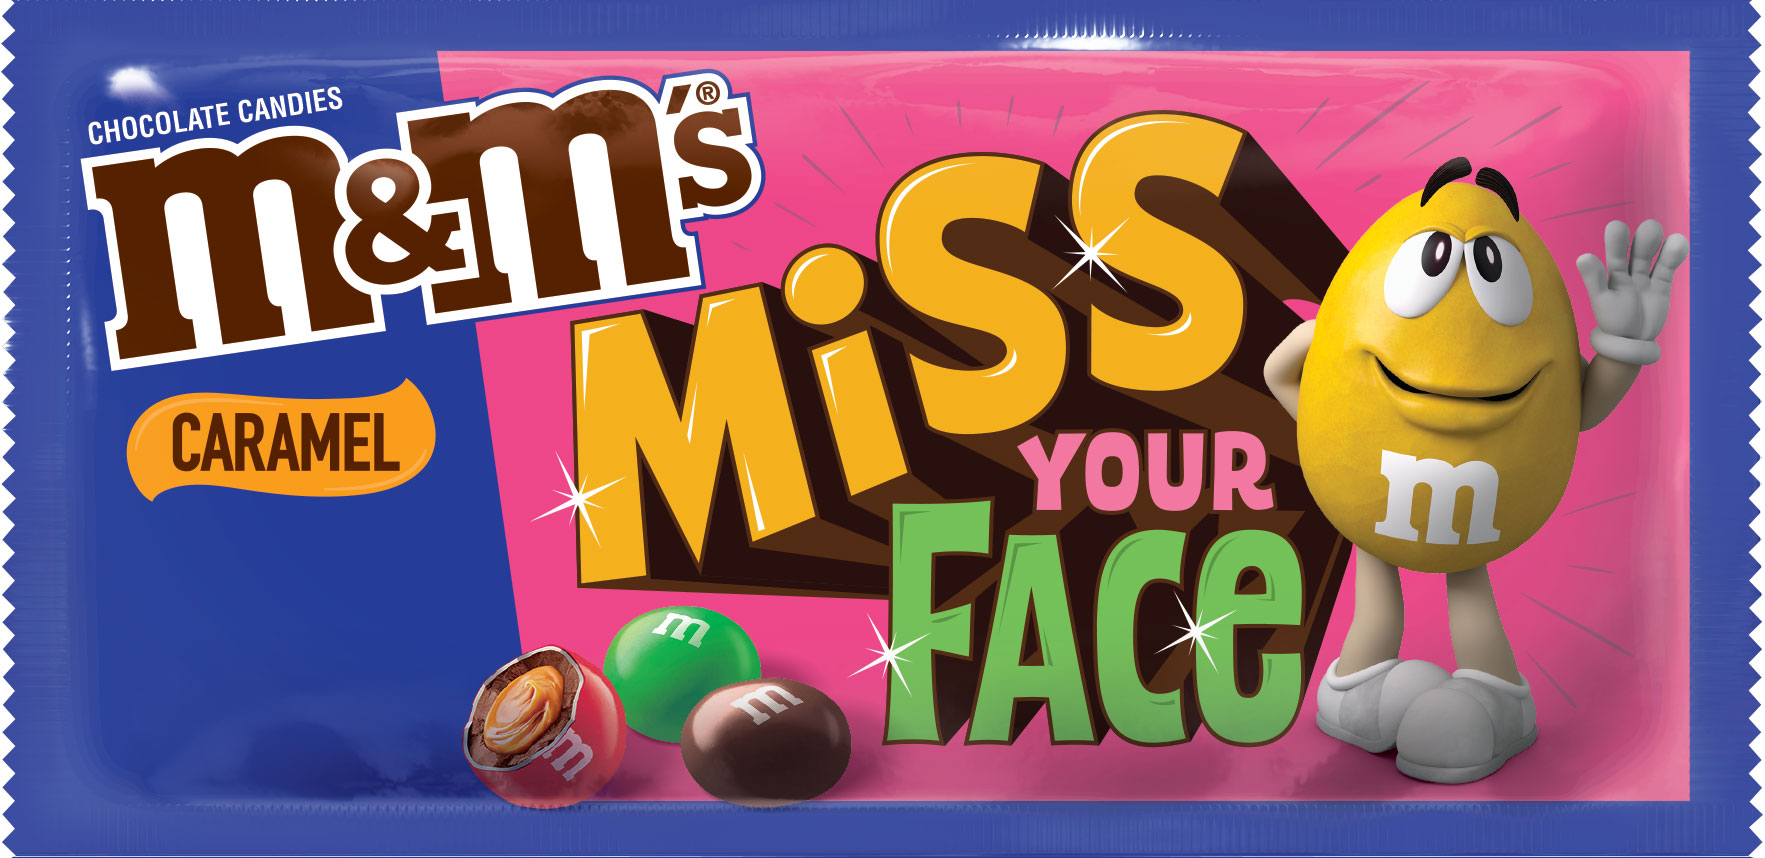 Mars releases limited-edition M&M'S packs